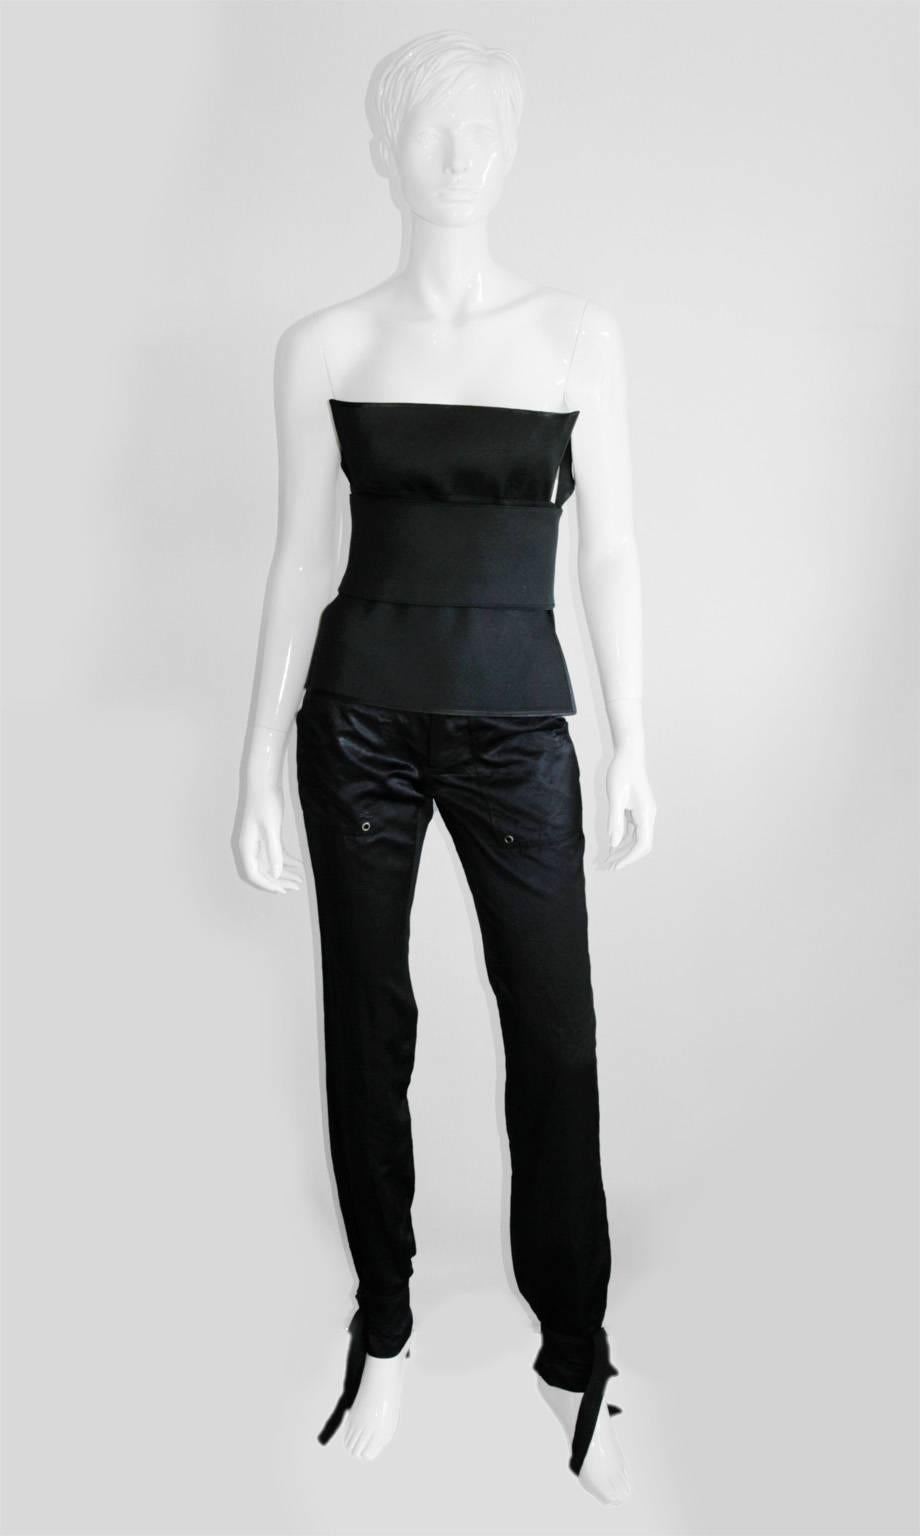 That Iconic Tom Ford YSL Rive Gauche 2001 Black Runway Bustier Top In Size 34!

Who could ever forget Tom Ford's very first show for Yves Saint Laurent Rive Gauche, back in 2004... All in black & white, & with that heavenly tailoring & corseted